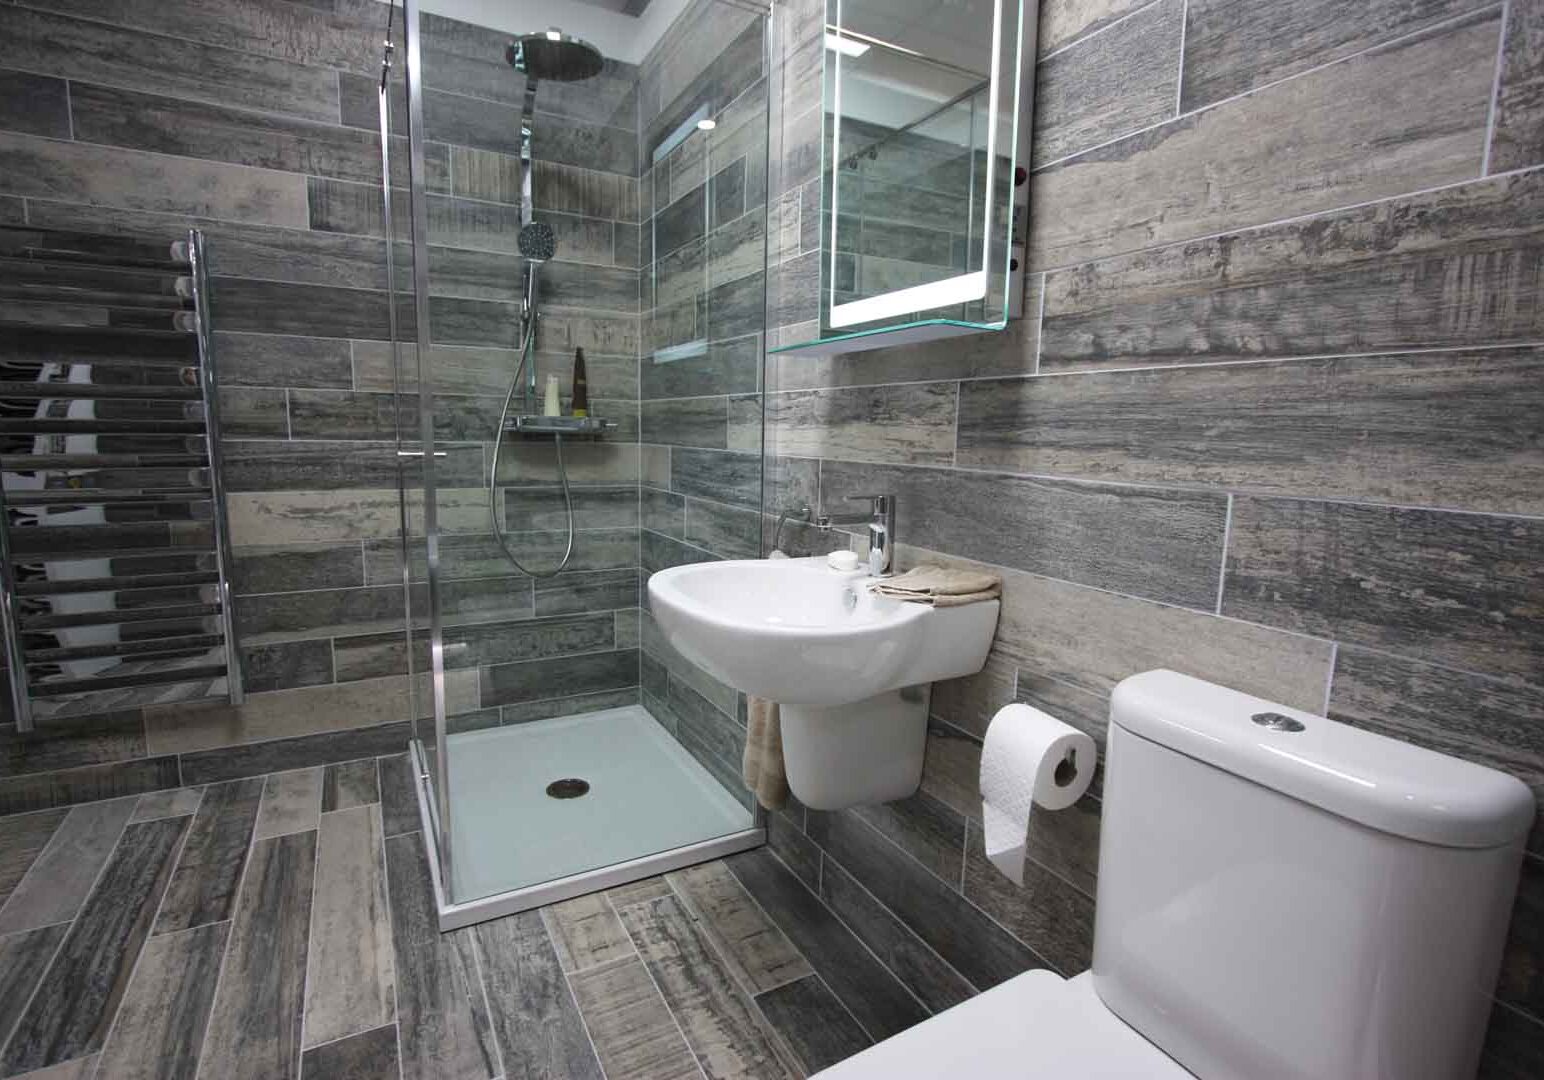 Bathroom tiles with sink and shower.